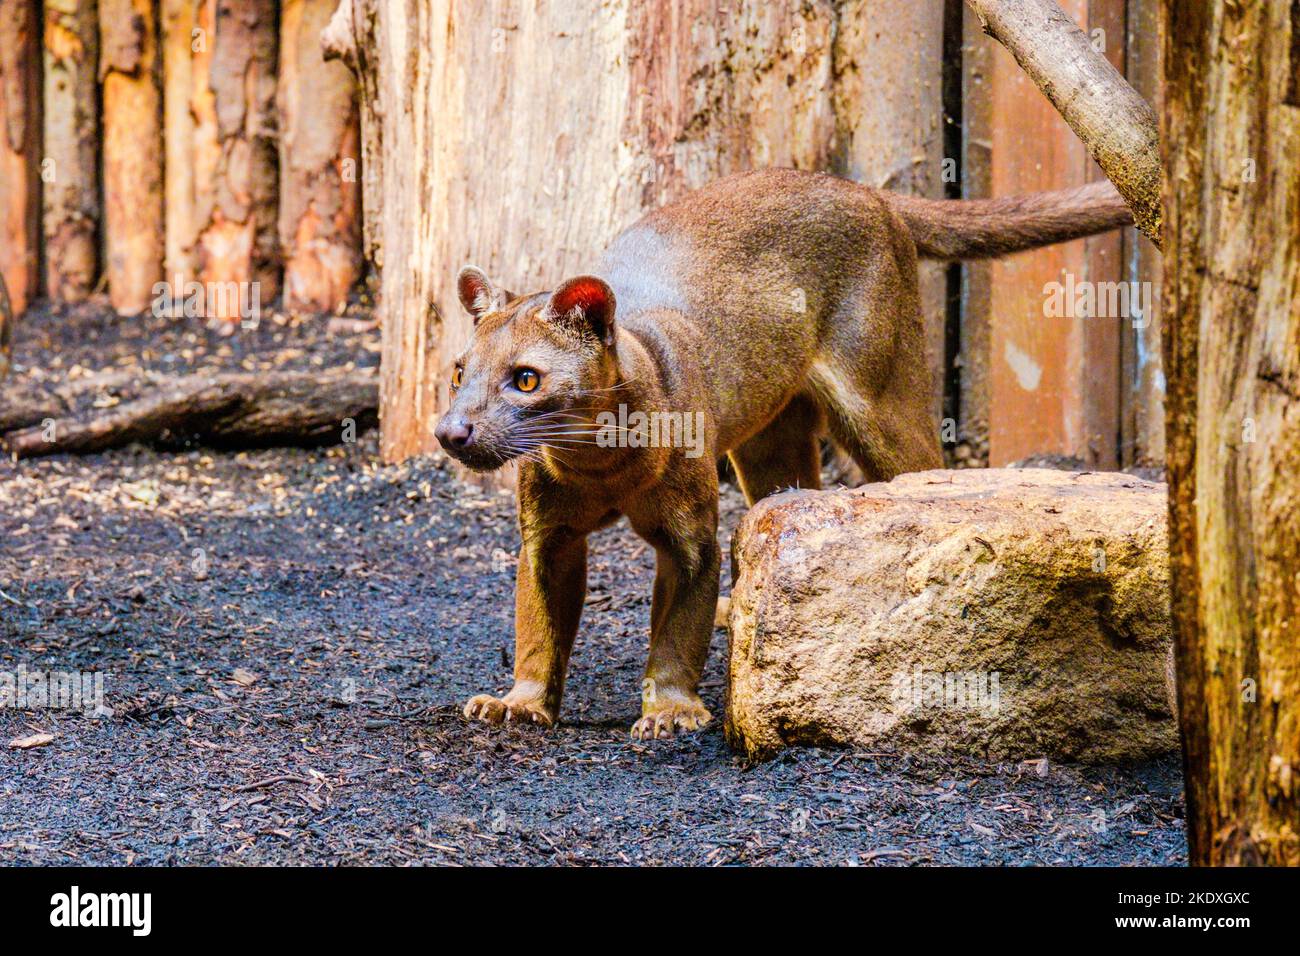 The Fossa of Madagascar close-up portrait in zoo Stock Photo